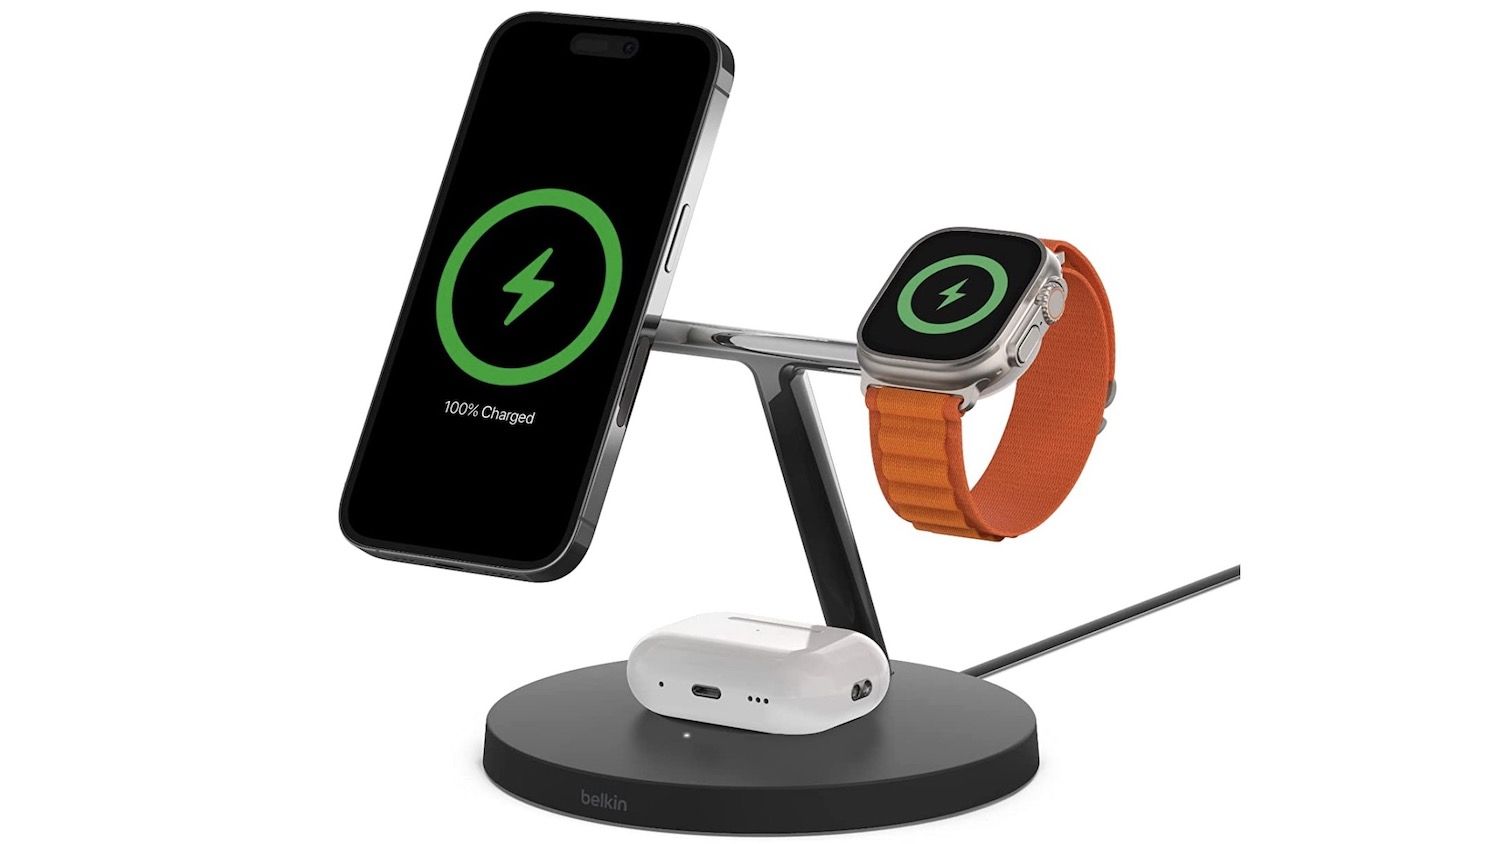 Belkin MagSafe 3-in-1 wireless charging stand